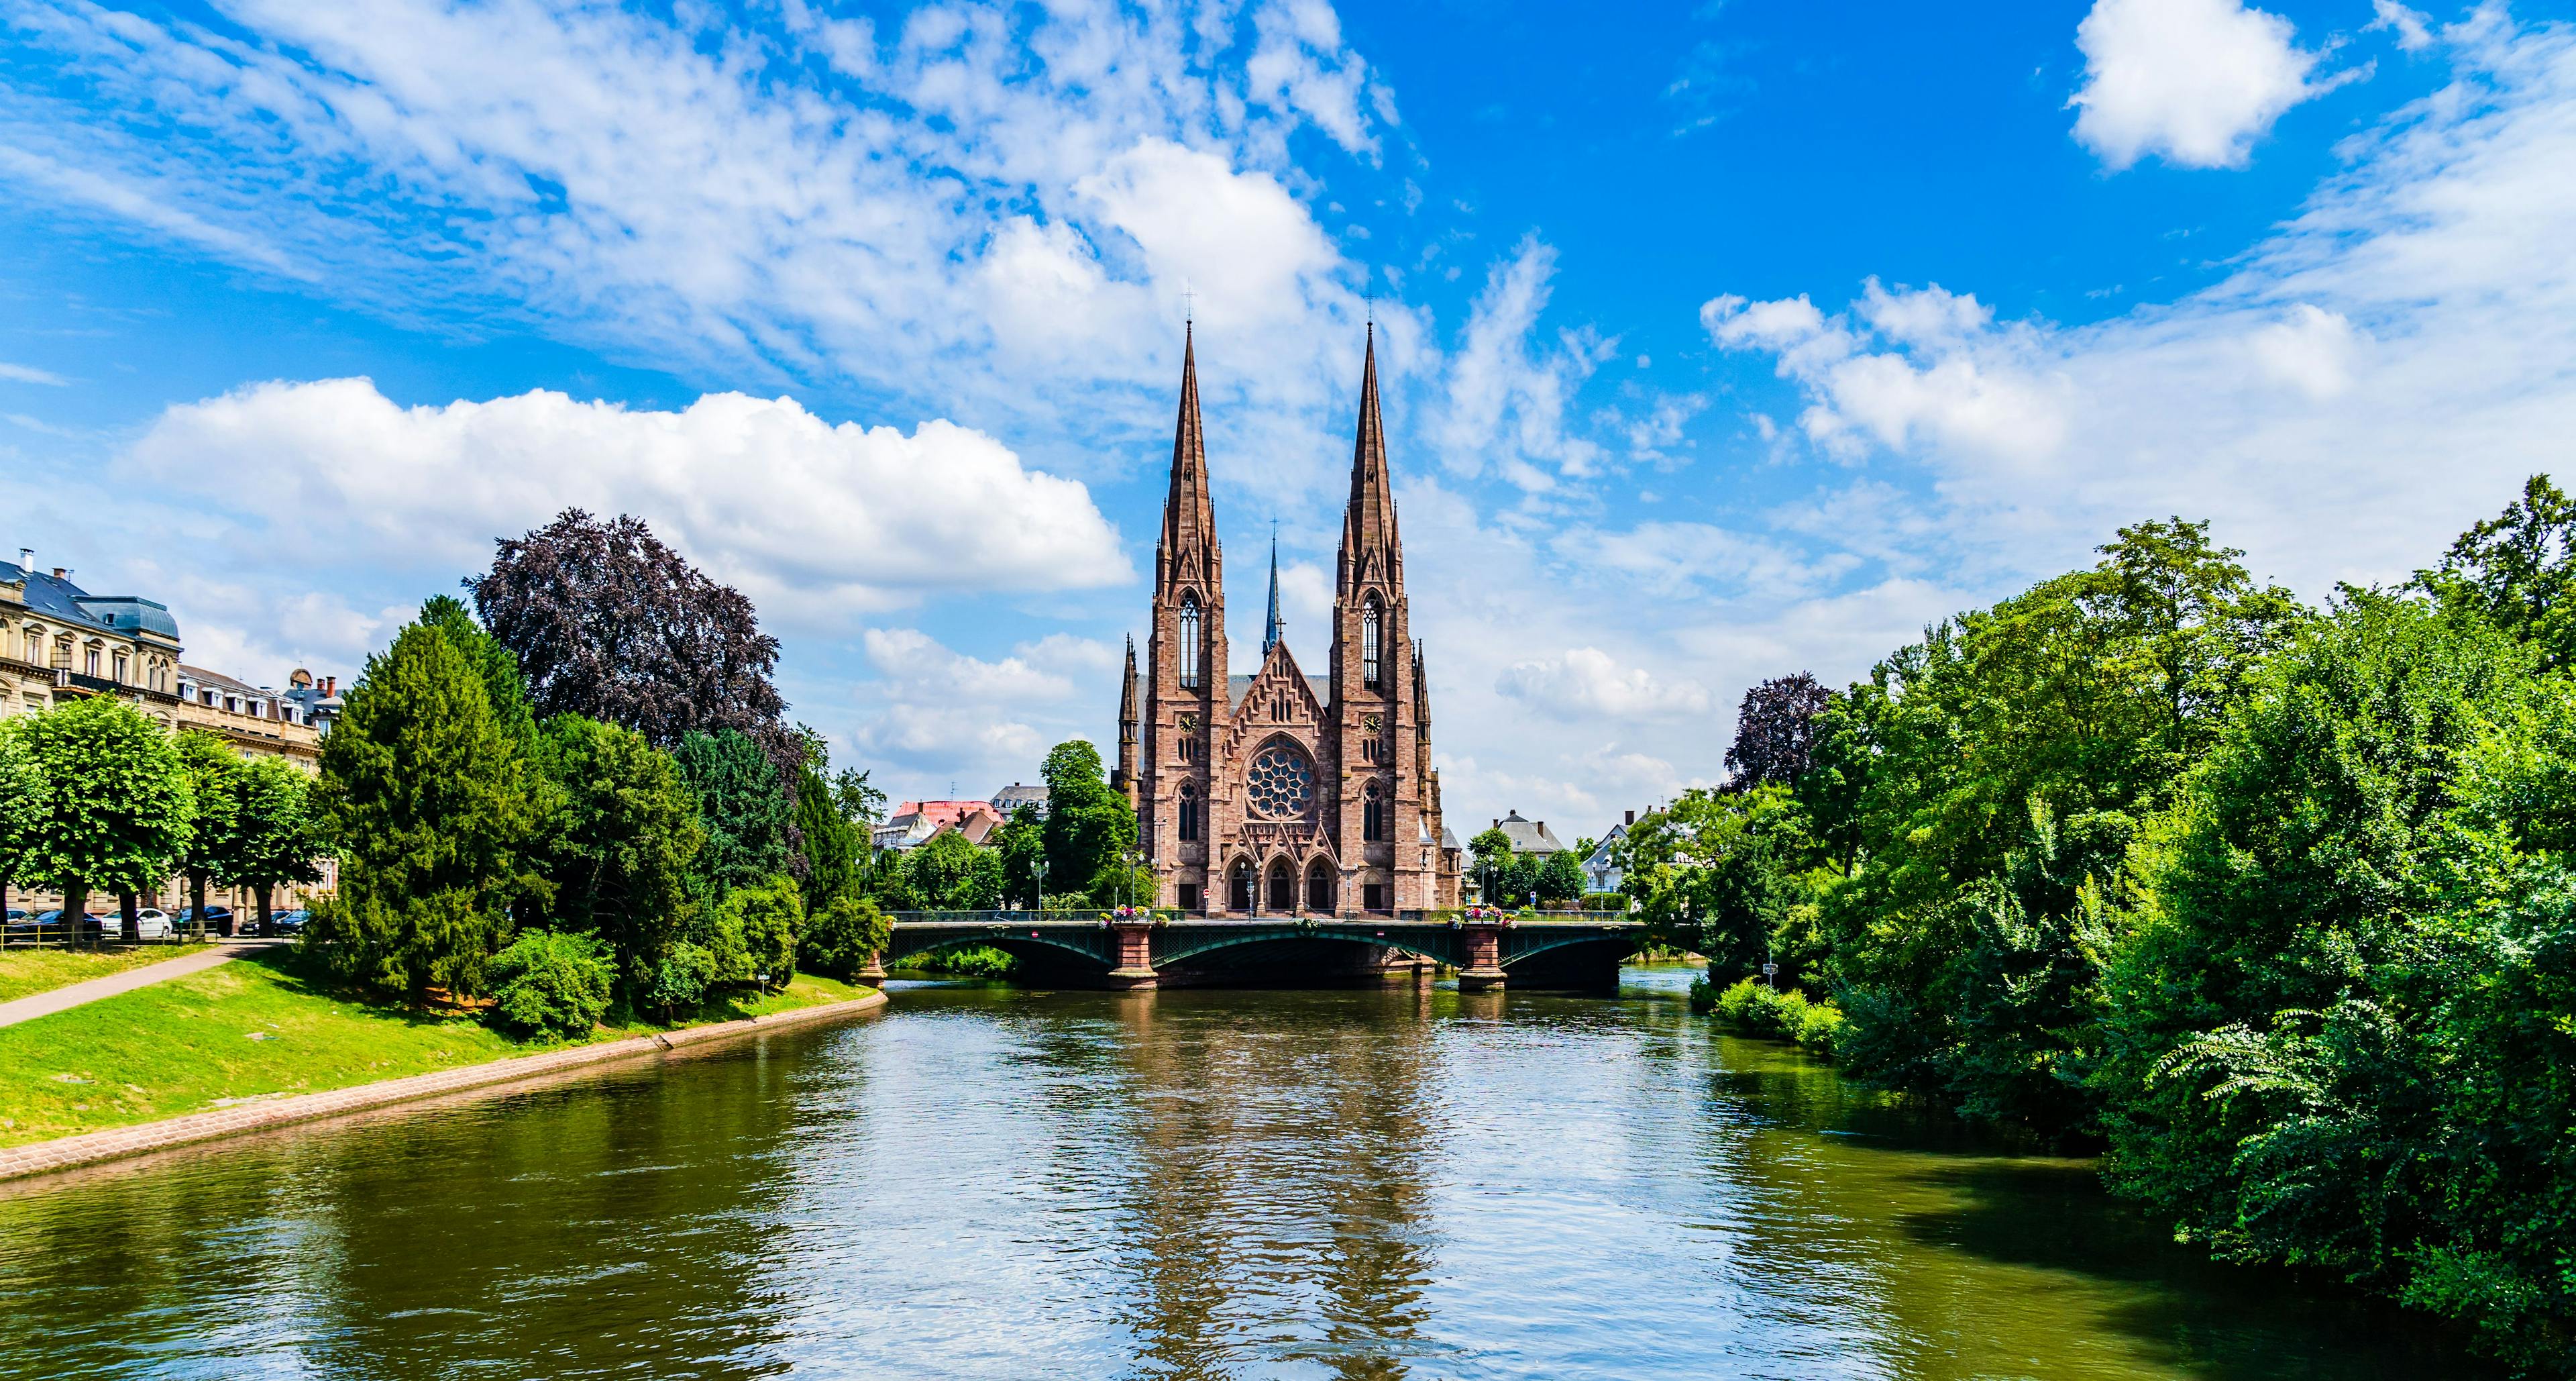 Visit Strasbourg: From Petite France to European Parliament - Explore Strasbourg's Historic Churches, Including St. Paul's l - ratepunk